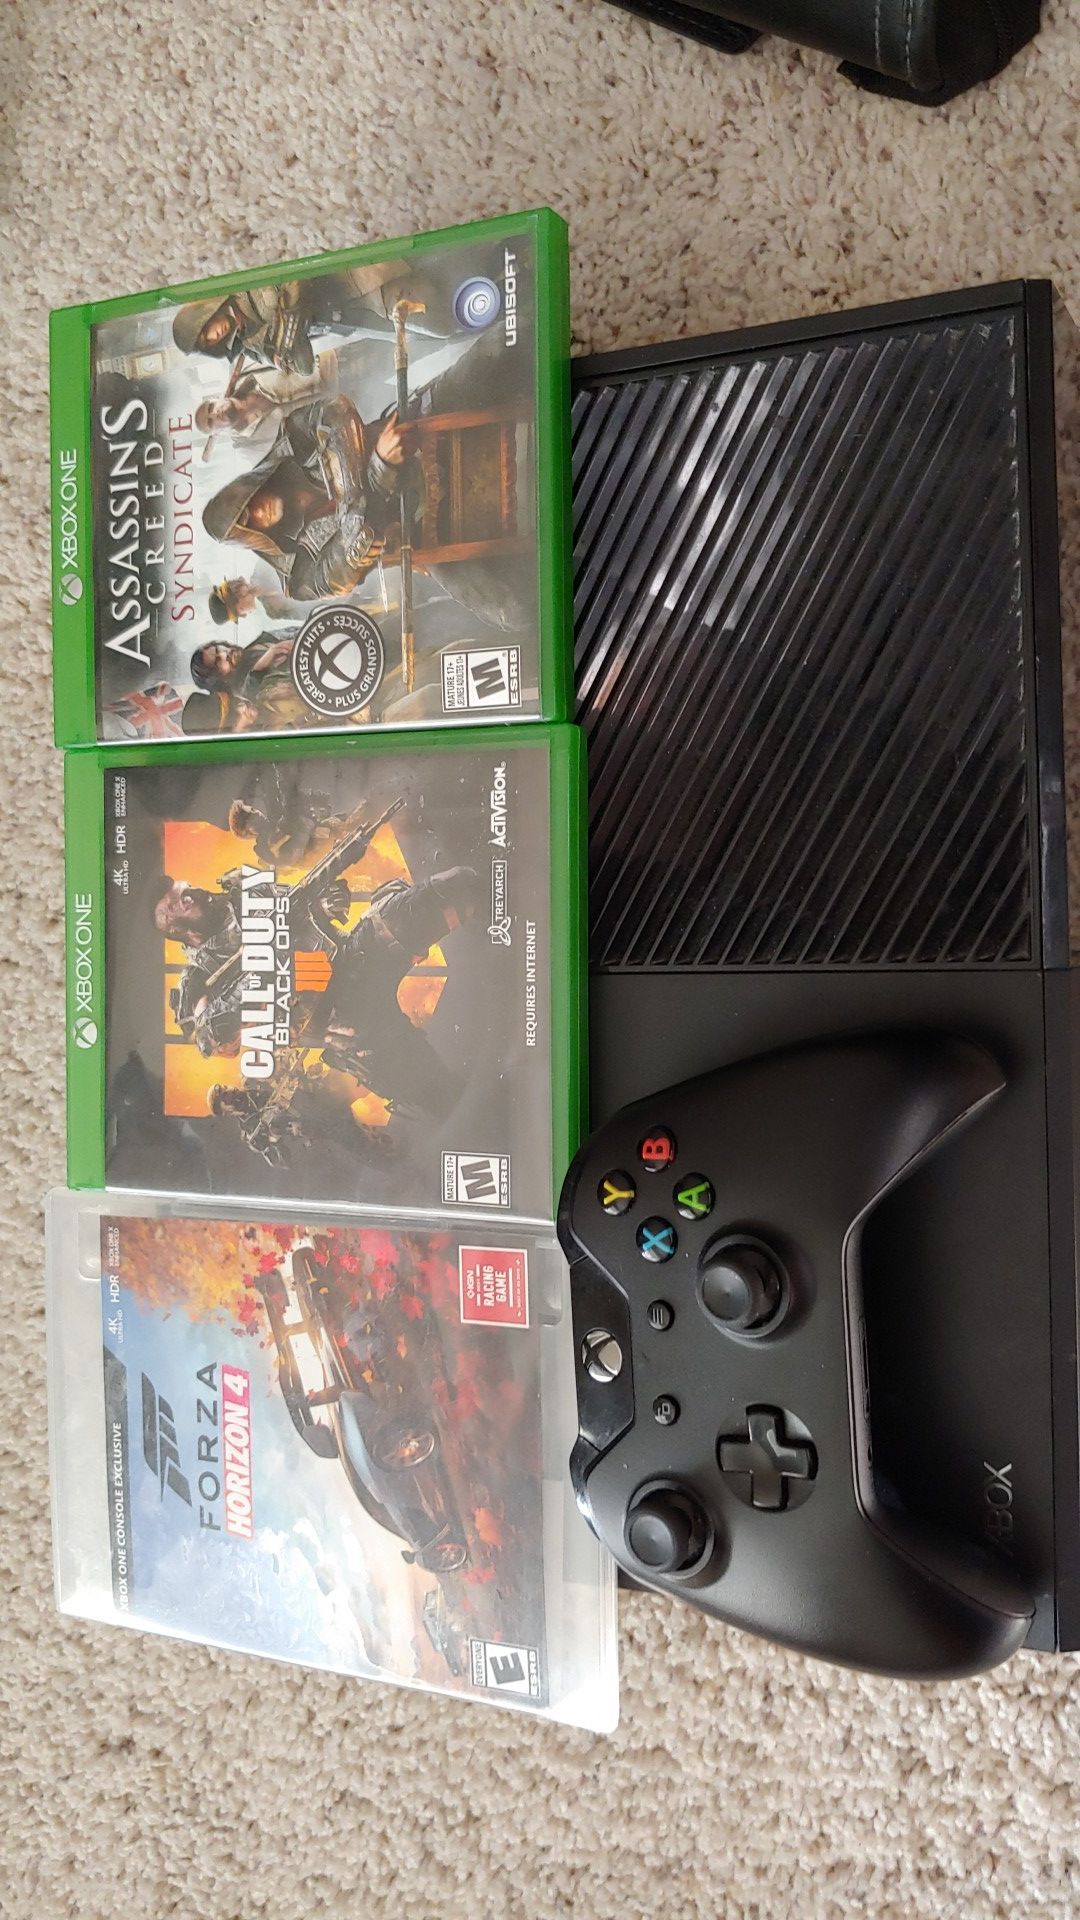 Xbox one controller 3 games-price Firm